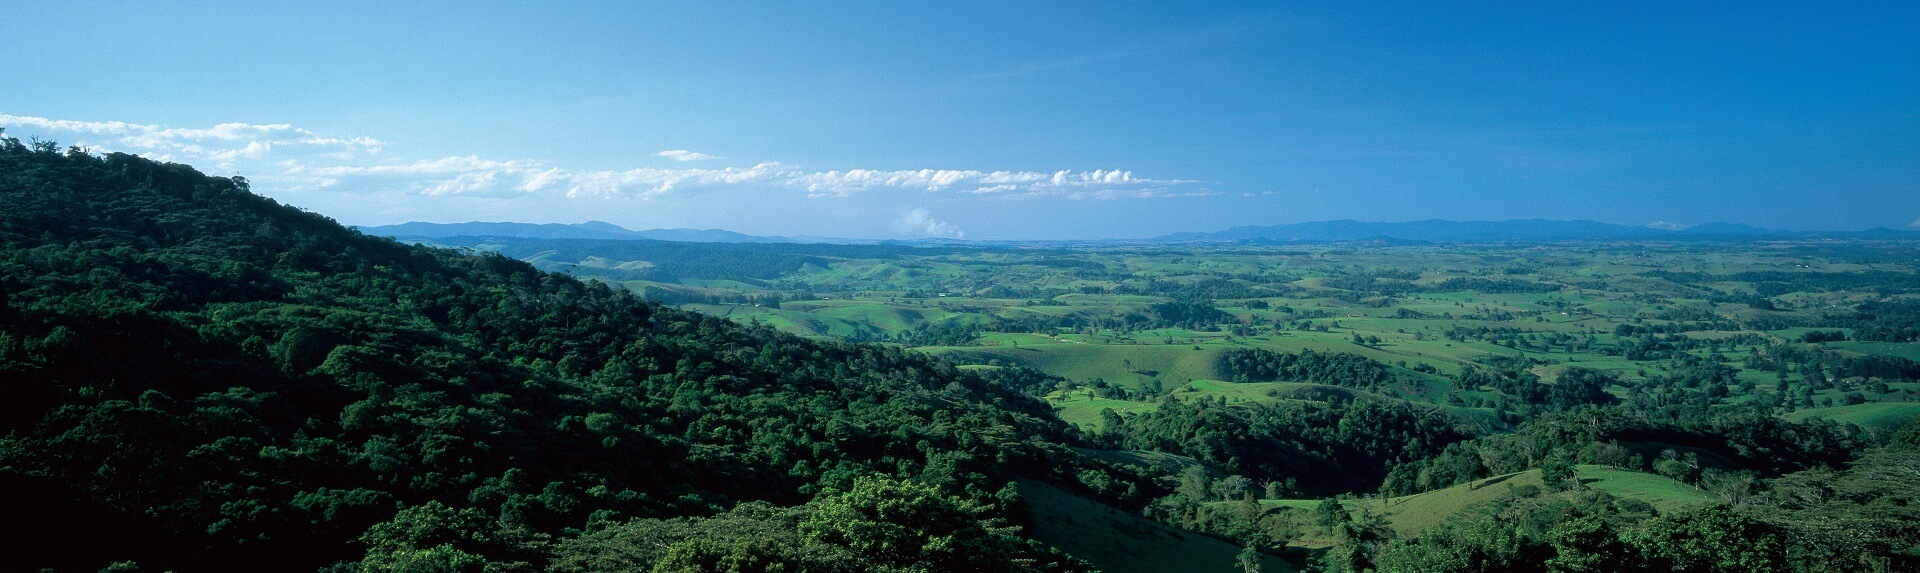 1 Day Outback Tasting Tour from Port Douglas